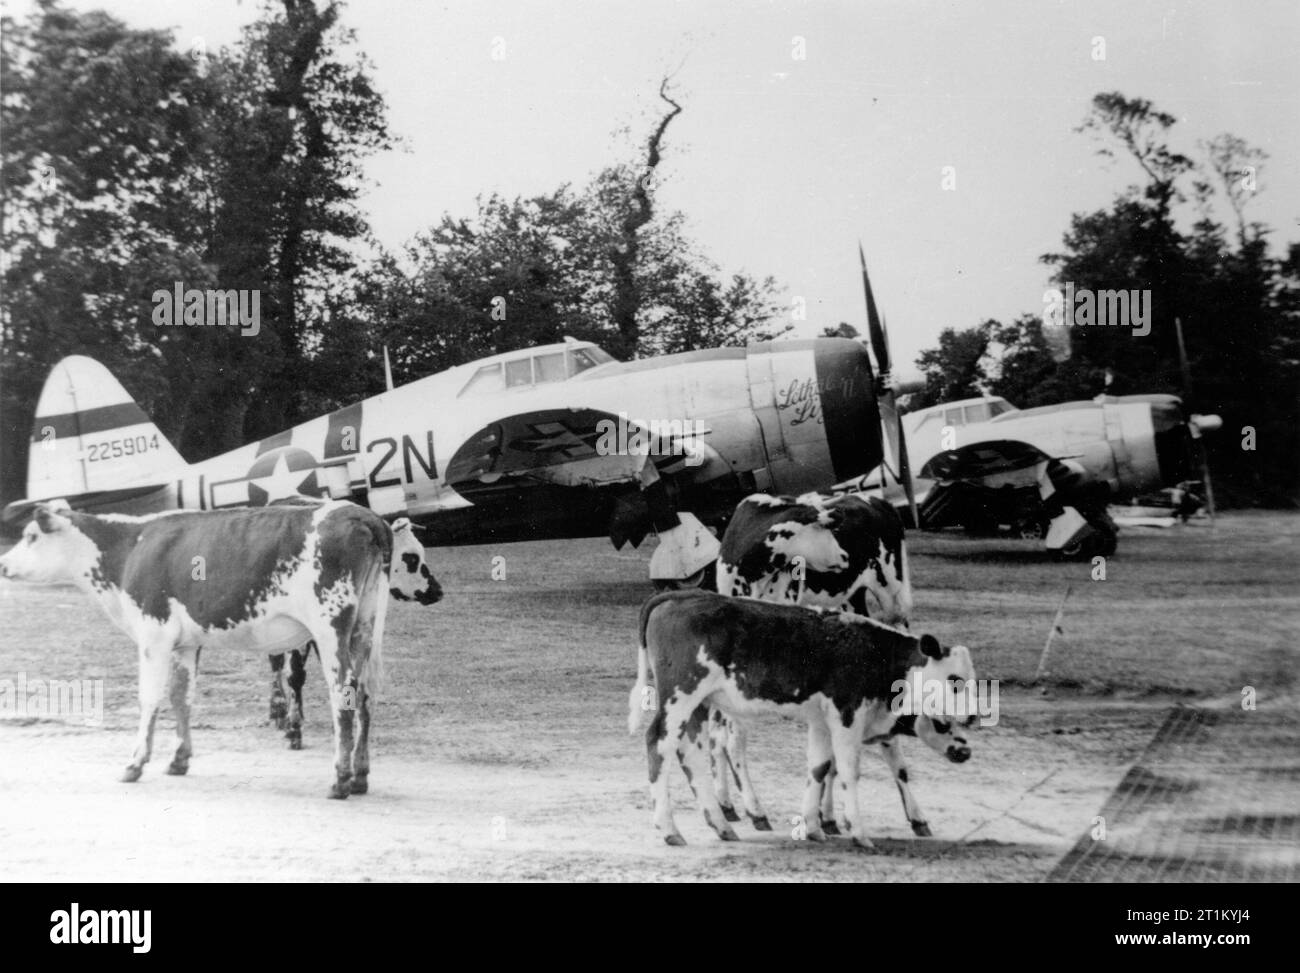 Republic P-47D-22-RE Thunderbolts, including (2N-U, serial number 42-25904) nicknamed 'Lethal Liz II', of the 50th Fighter Group, 81st Fighter Squadron, with cows at Carentan Airfiled (A-10), France, Summer 1944. (s/n 42-25904 (50th FG, 81st FS) lost Aug 17, 1944. MACR 8500. s/n 42-26063 (50th FG, 81st FS, *Jean*) interned in Switzerland Oct 15, 1944). The 50th FG with 81st FS and 313rd FS was based with P-47D at Giebelstadt airfield, south of Würzburg/Germany from 20 April 1945 to 21 May 1945. Also the 417th Night Fighter Squadron with Northrop P-61A/B Black Widows was based at Giebelstadt fr Stock Photo